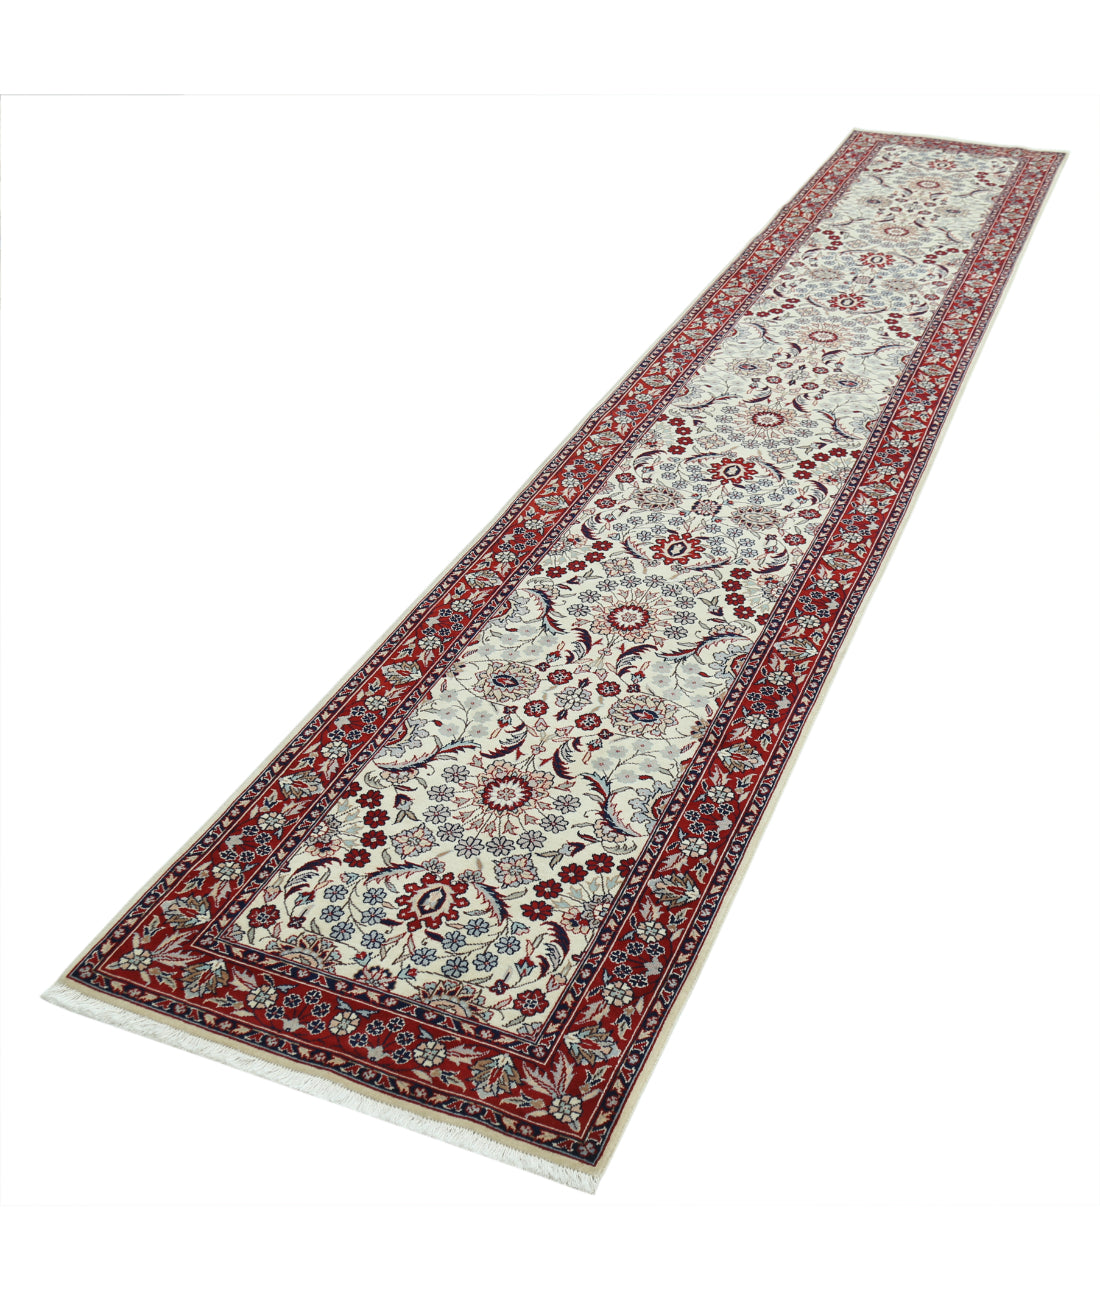 Heritage 2' 6" X 14' 1" Hand-Knotted Wool Rug 2' 6" X 14' 1" (76 X 429) / Ivory / Red